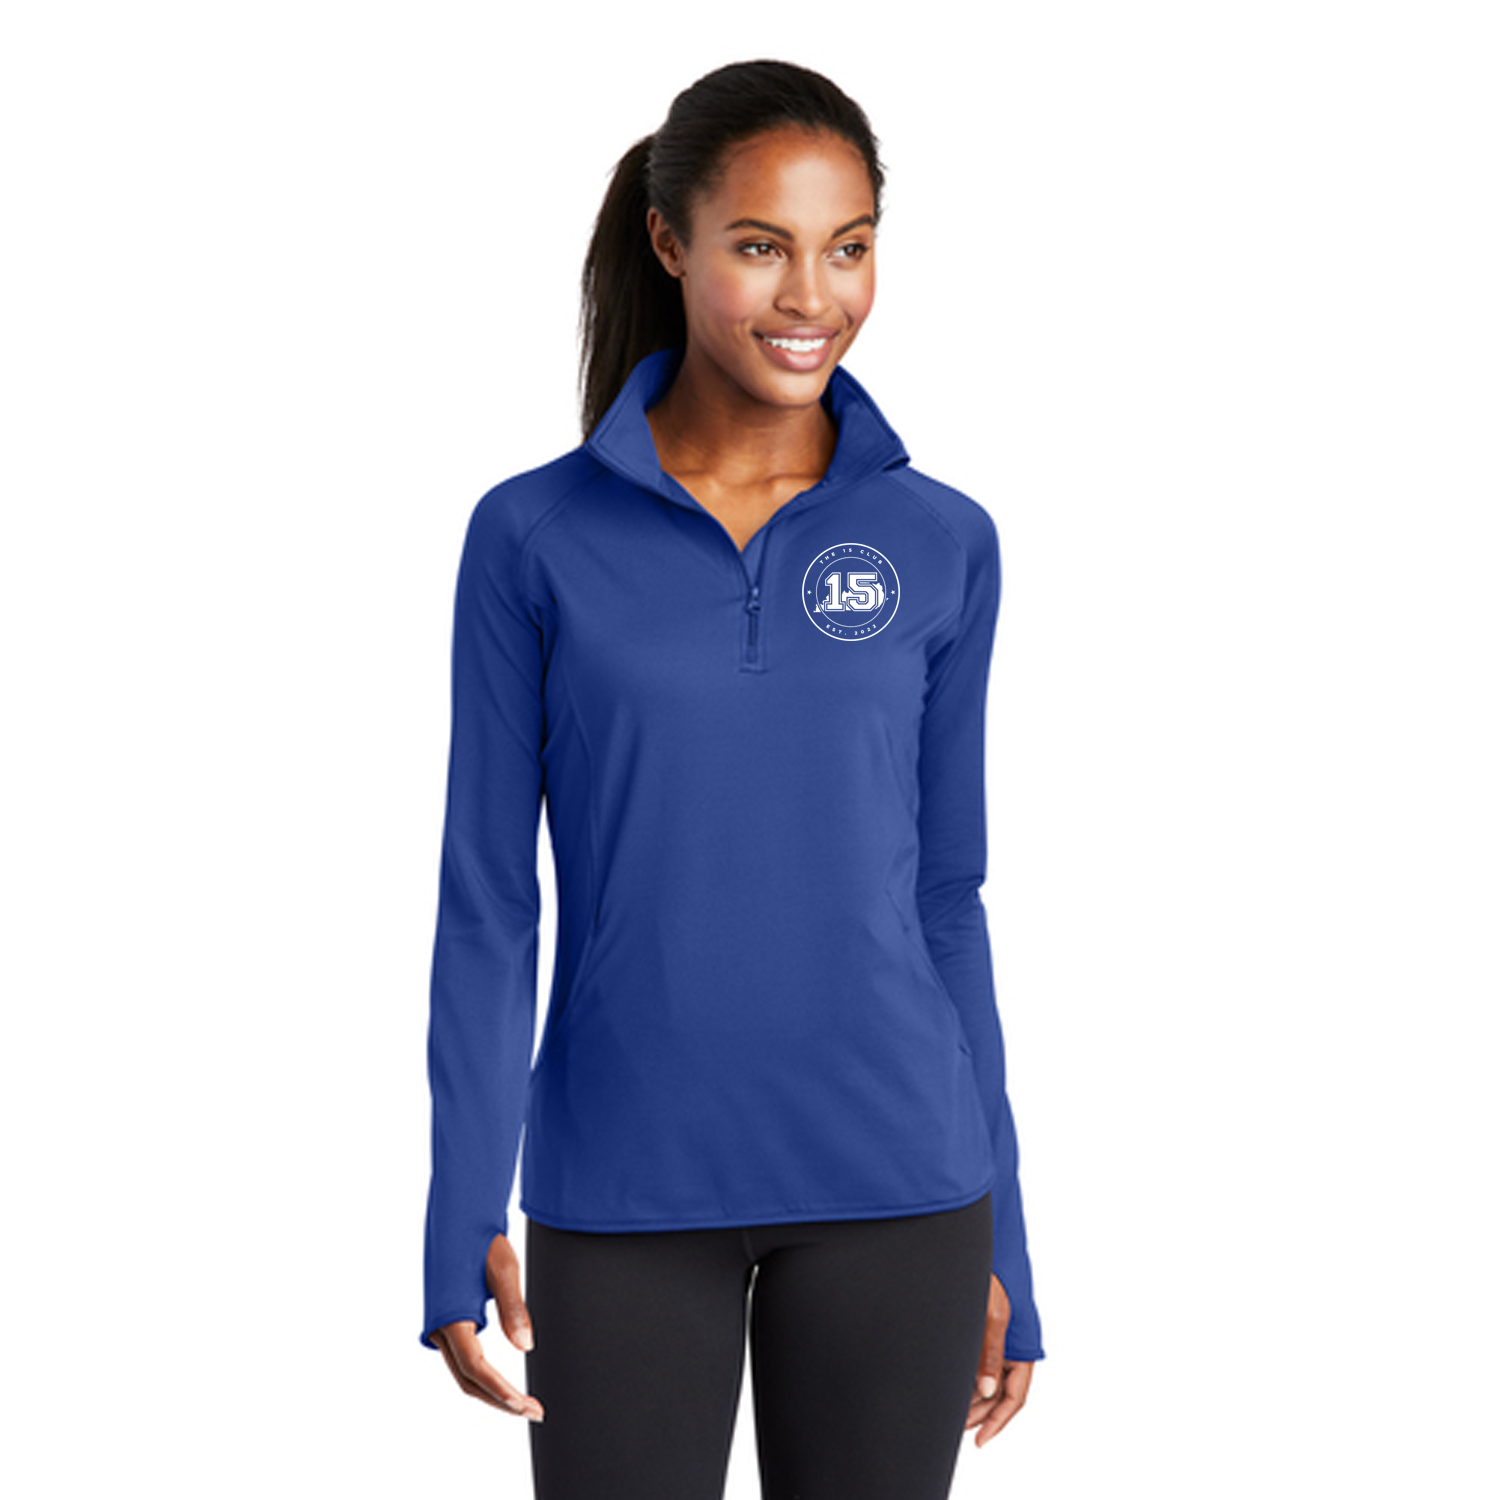 The 15 Club Ladies Sport-Wick Stretch 1/2-Zip Pullover